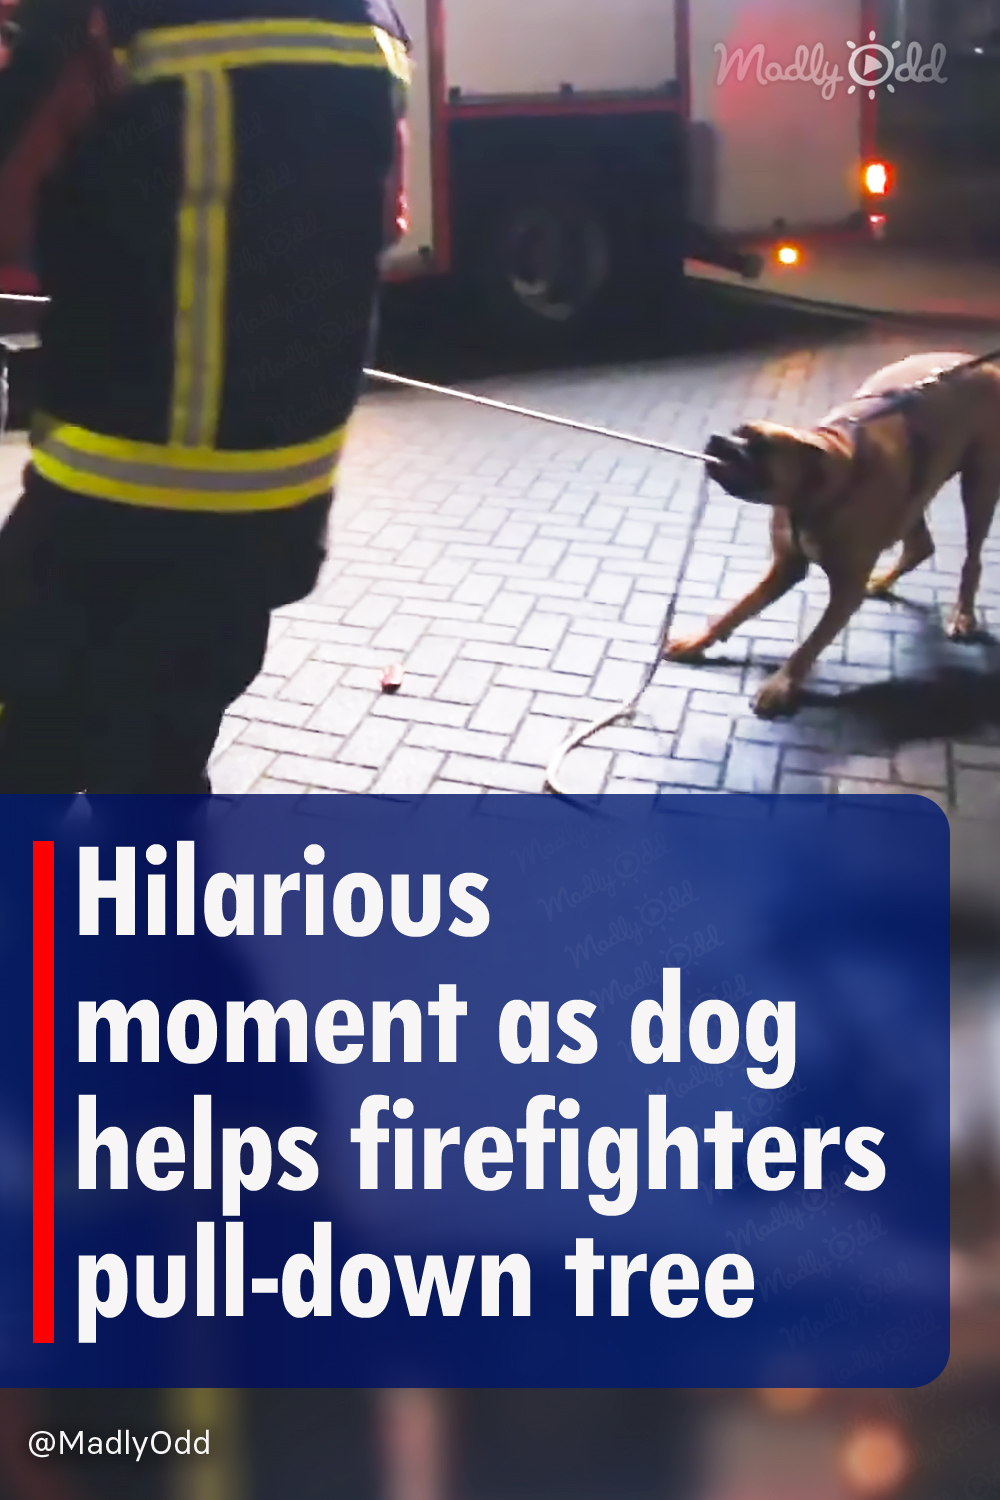 Hilarious moment as dog helps firefighters pull-down tree